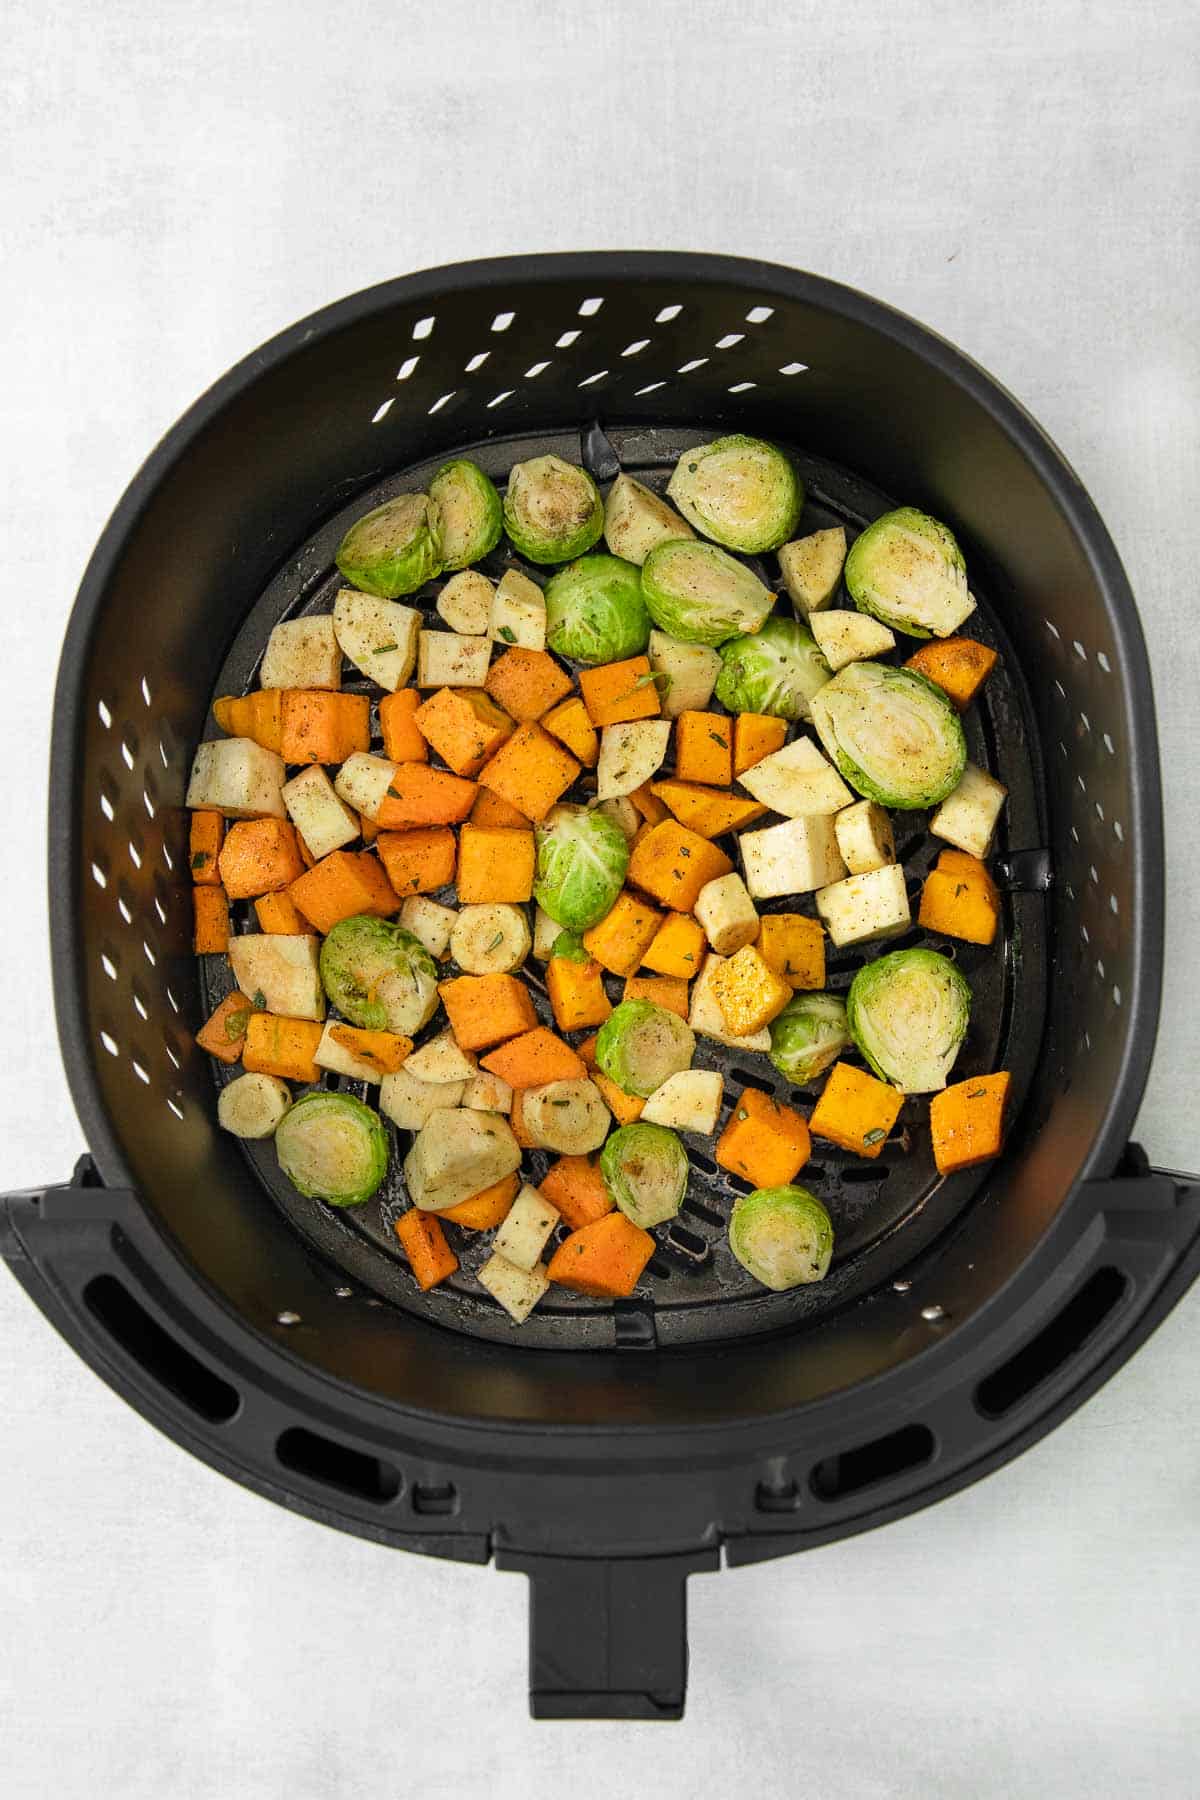 black air fryer basket with raw diced brussel sprouts, butternut squash and parsnips.